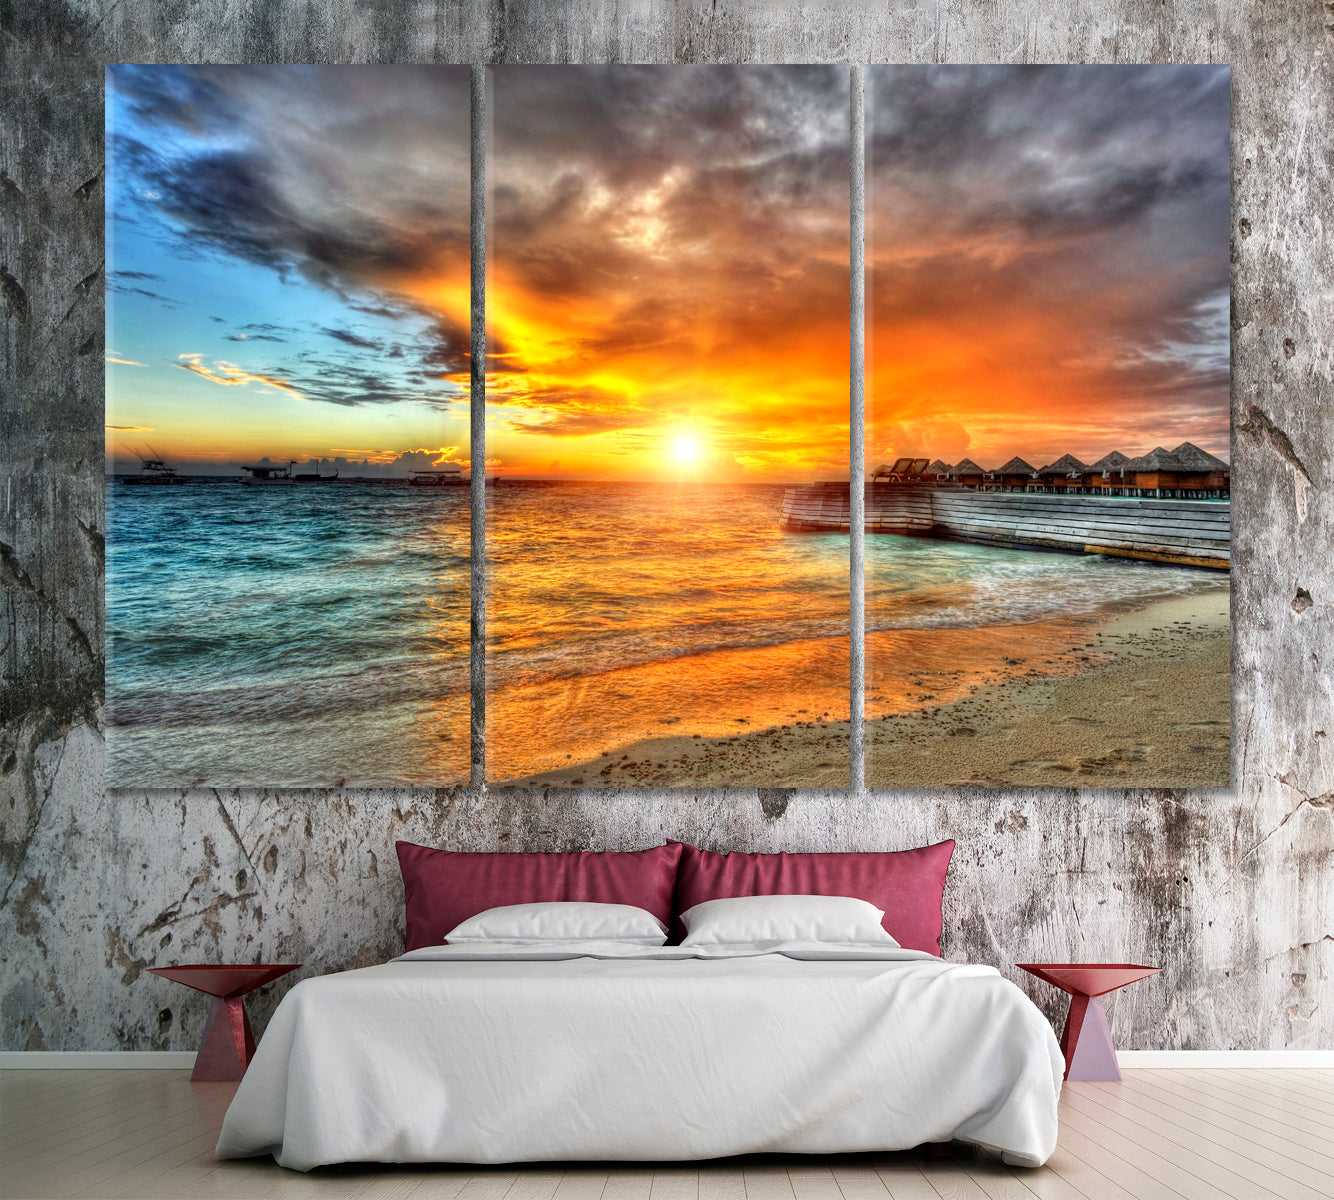 Beautiful Sunset over Indian Ocean Maldives Canvas Print ArtLexy 3 Panels 36"x24" inches 